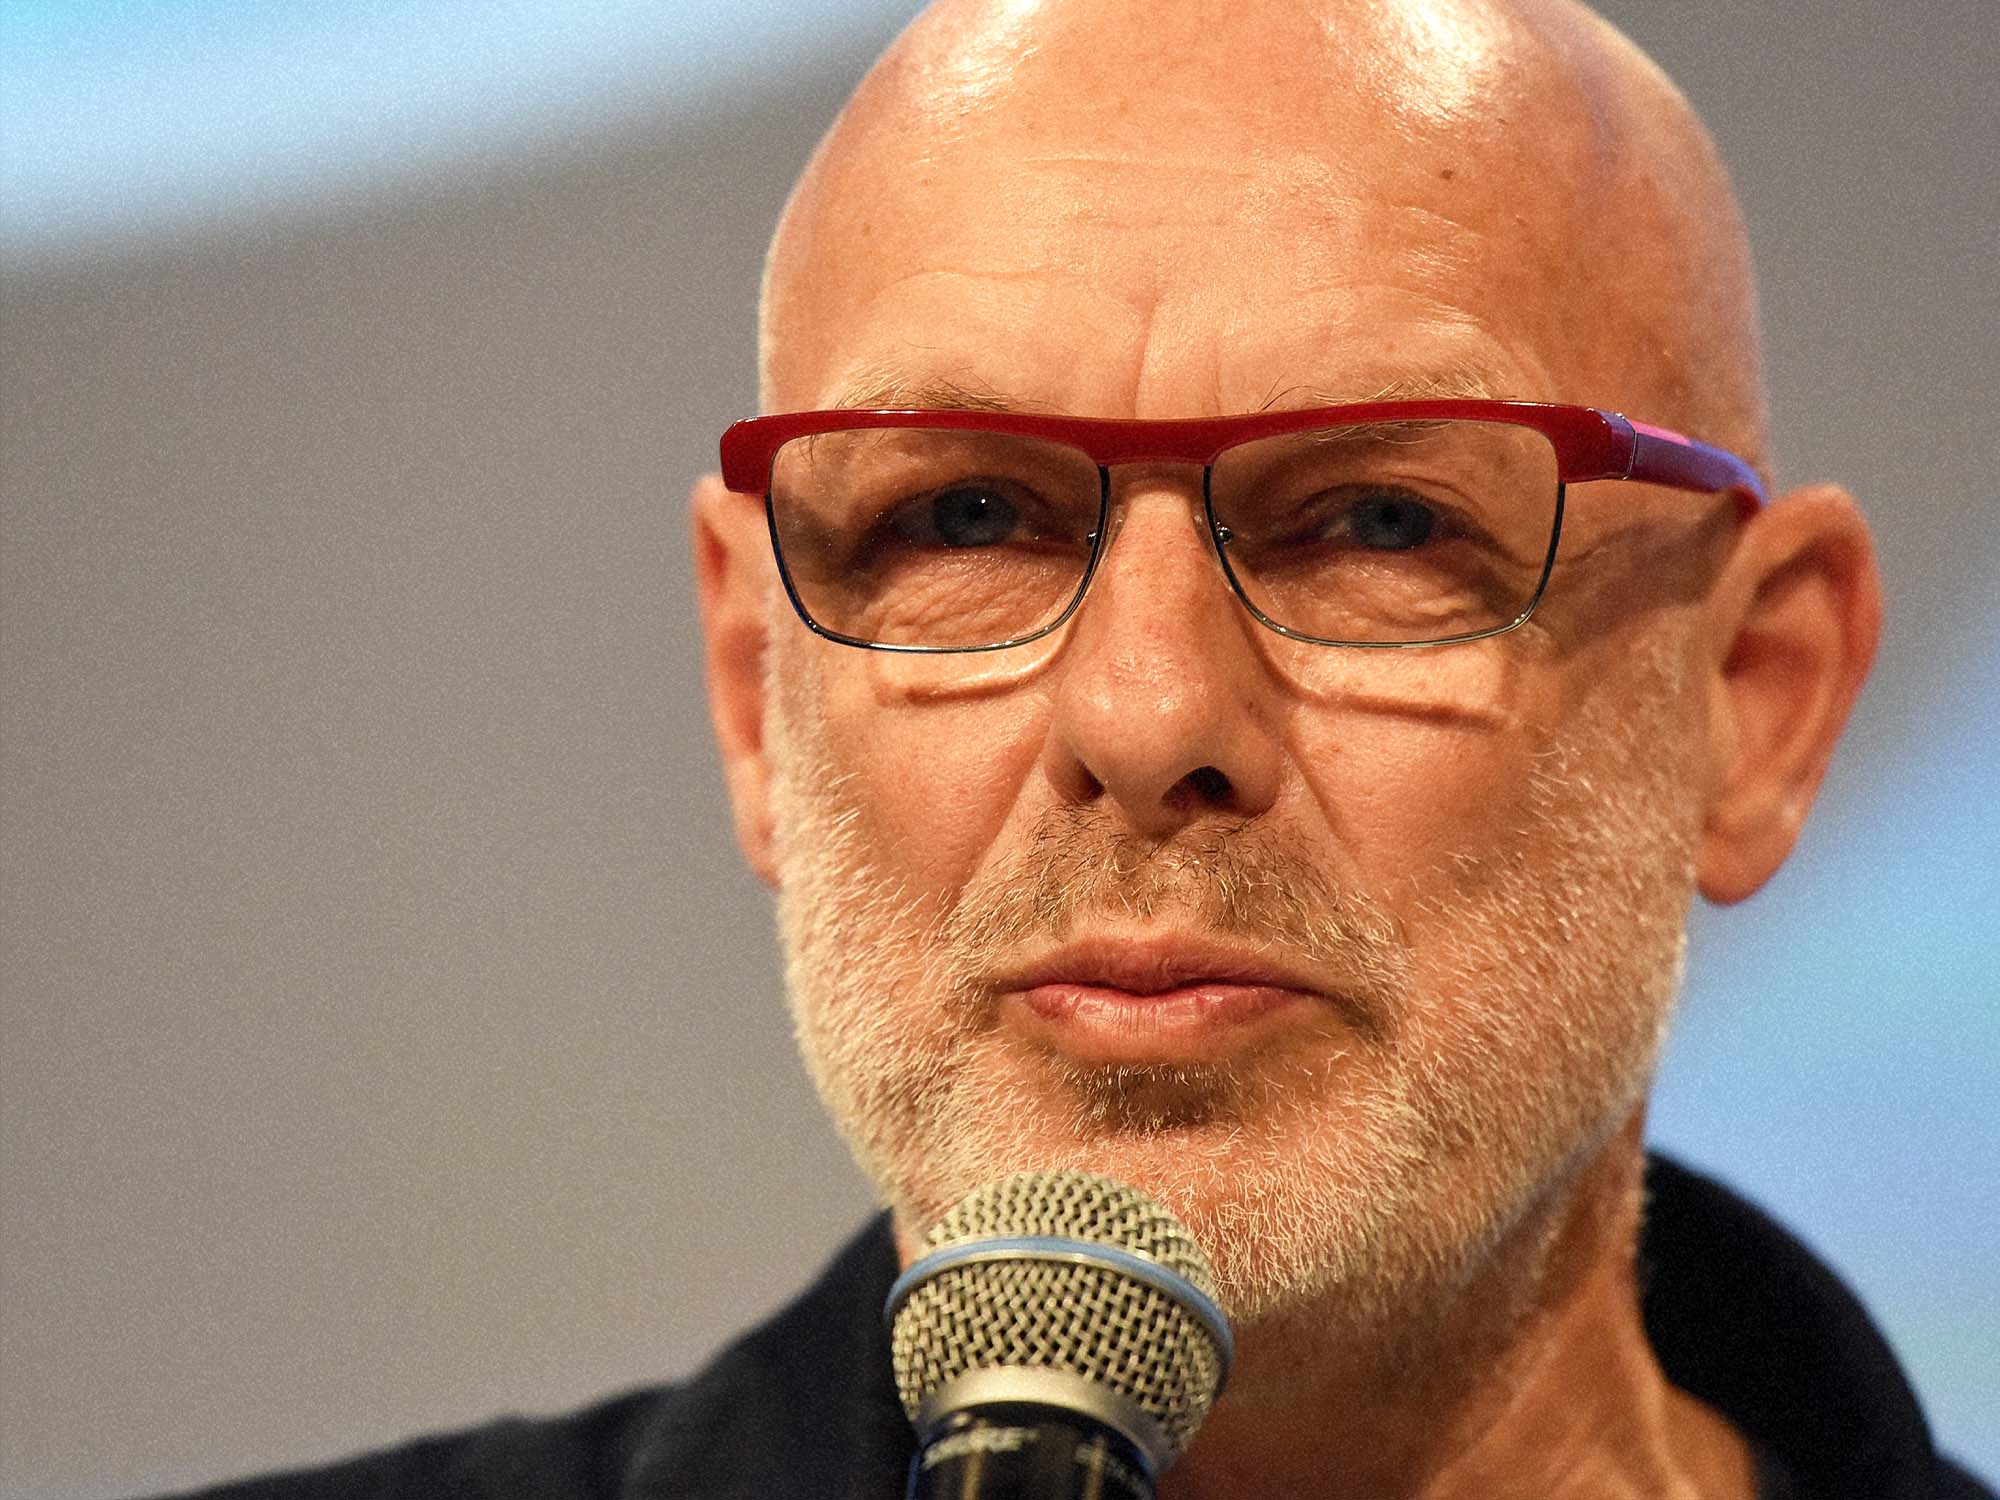 Brian Eno speaks into a microphone